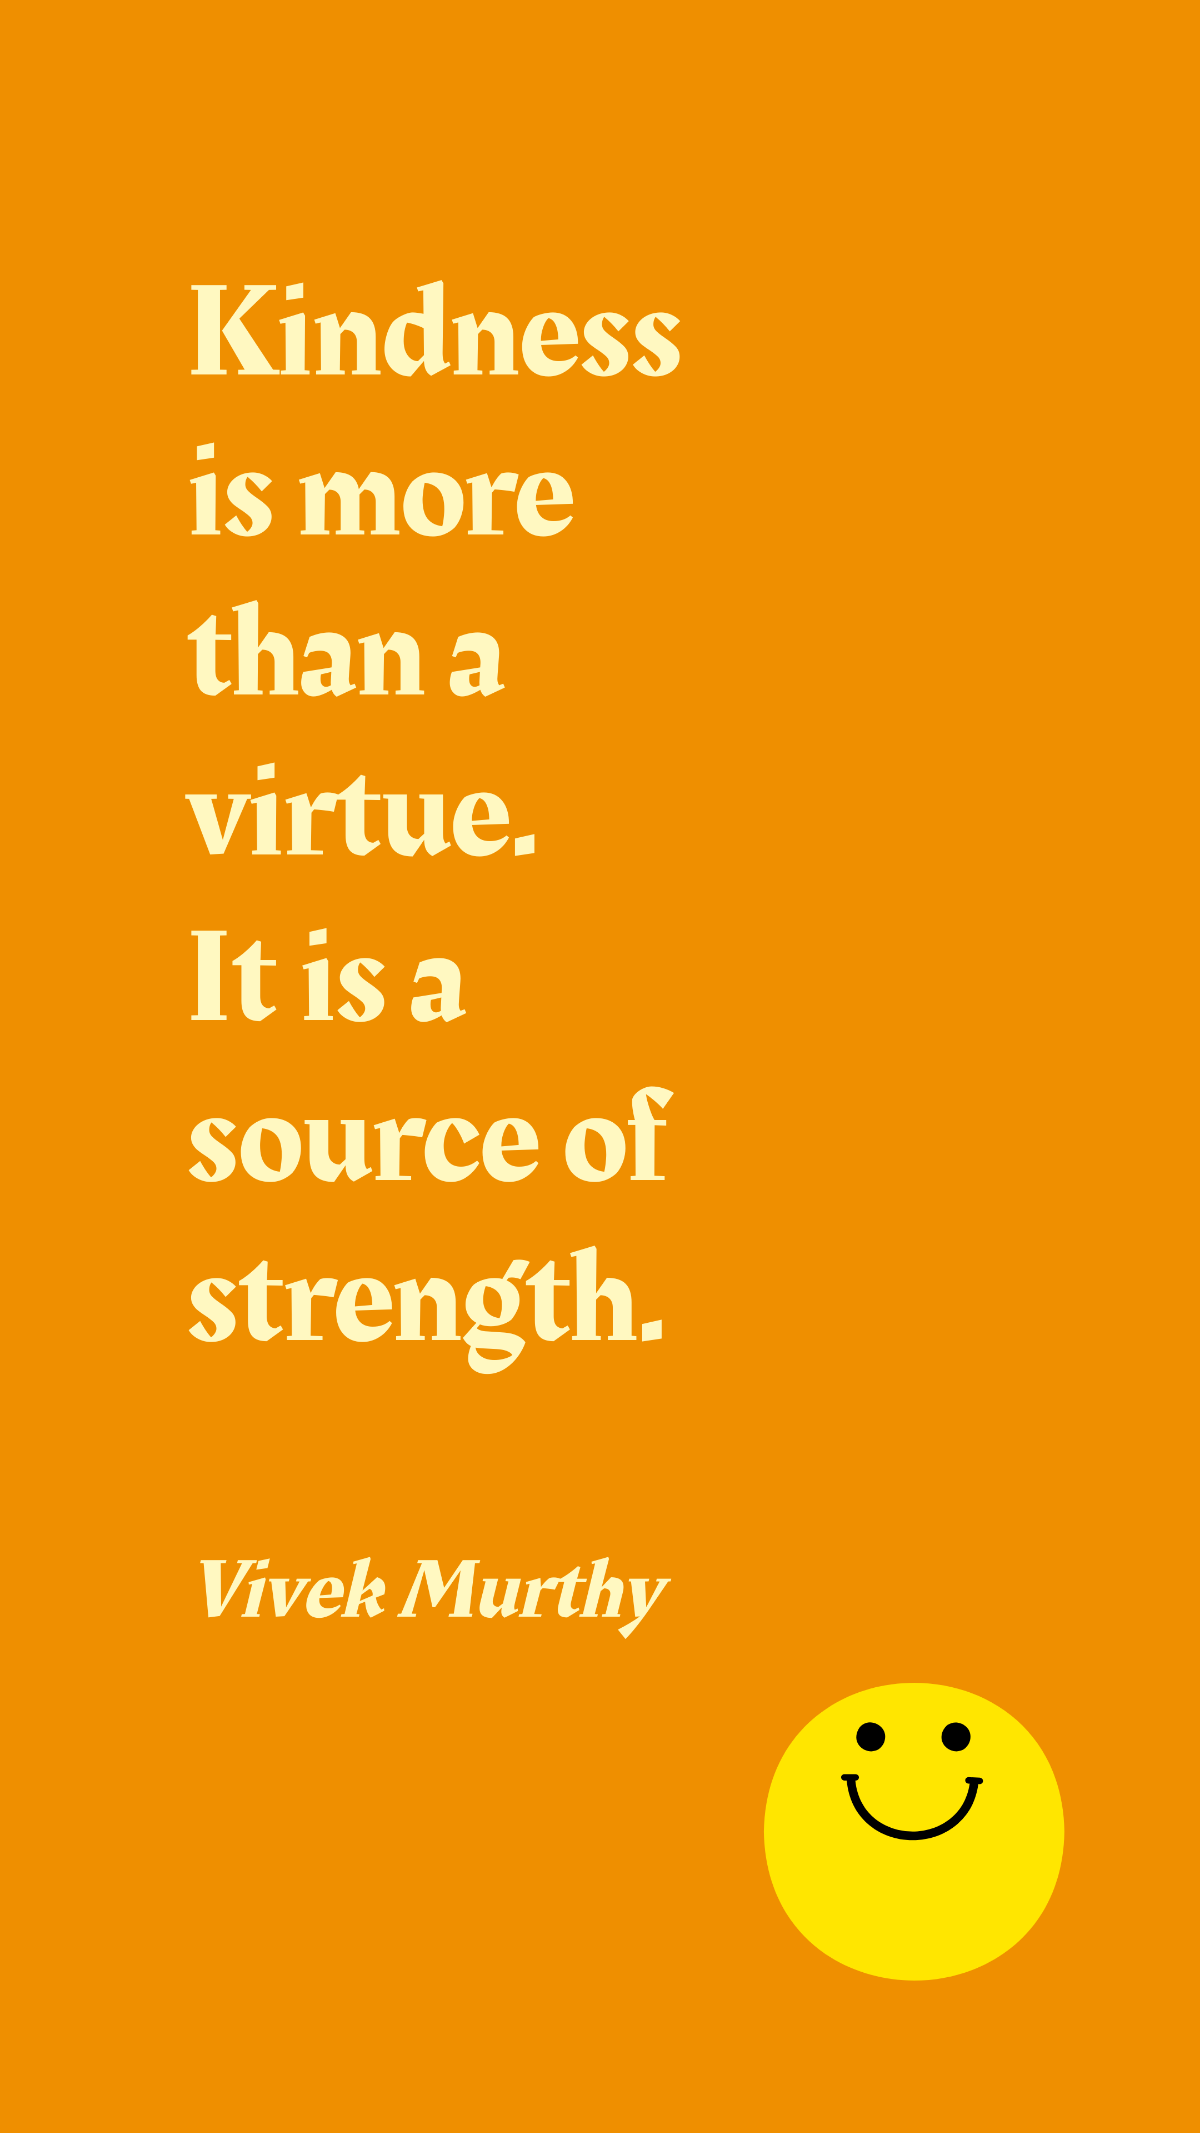 Vivek Murthy - Kindness is more than a virtue. It is a source of strength. Template